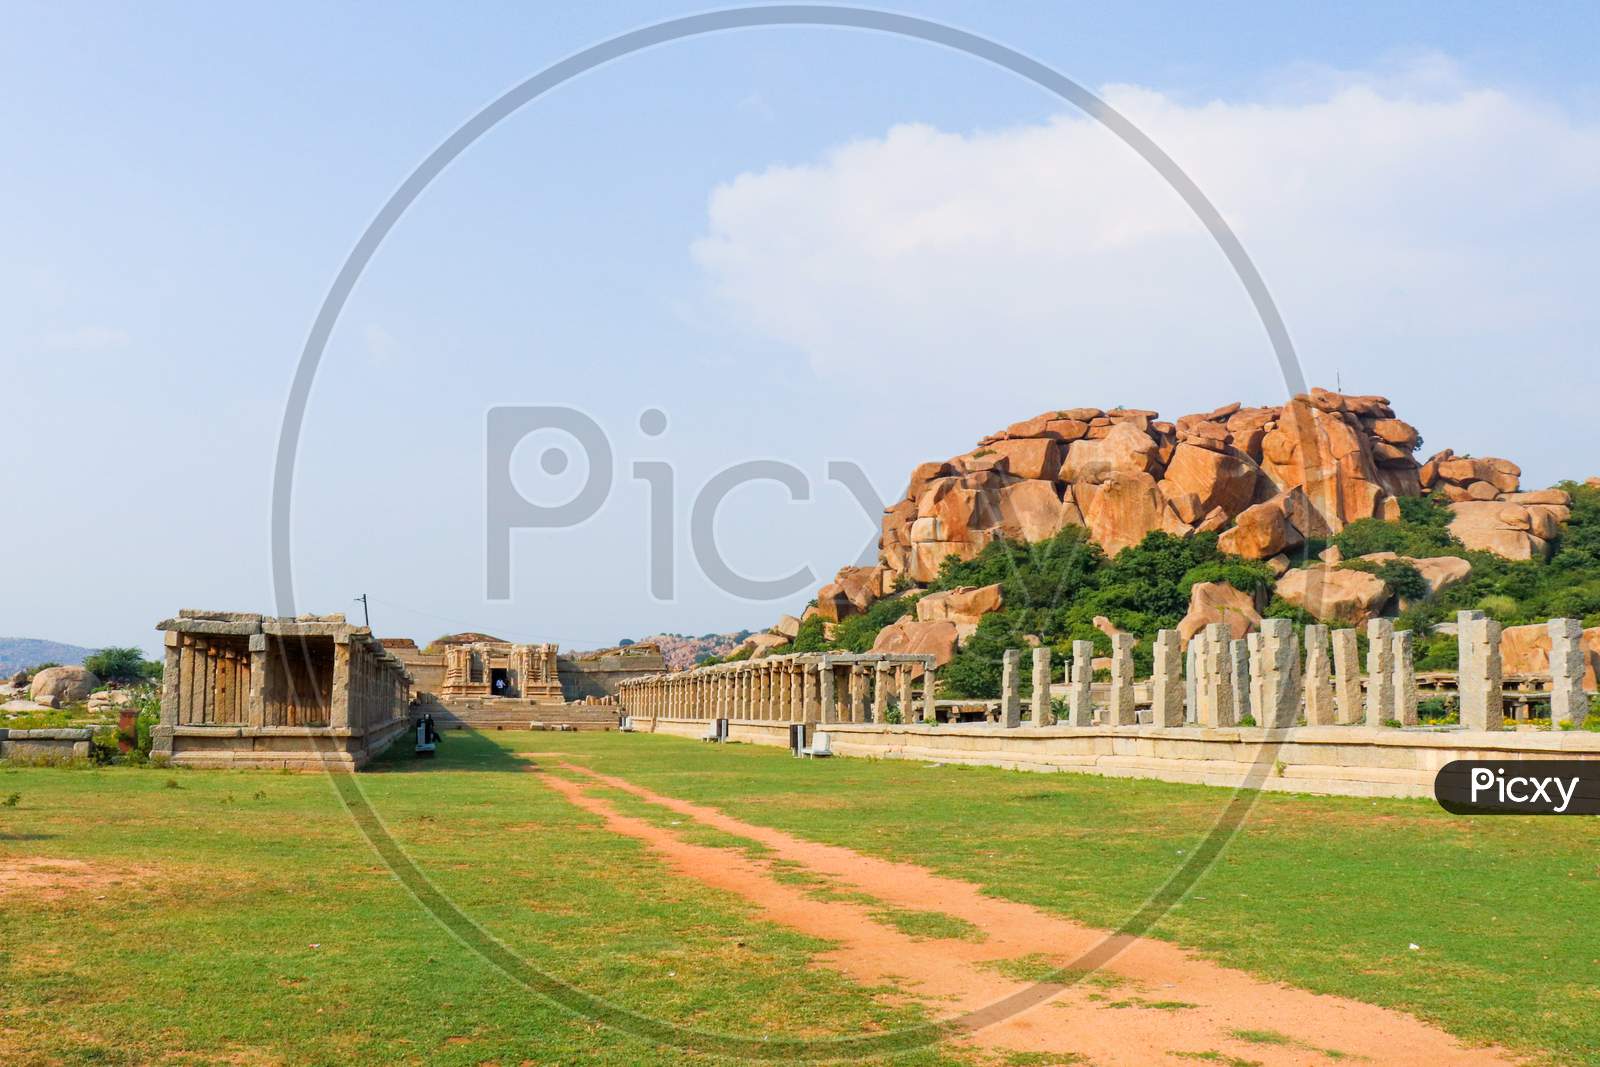 vitthal temple outside view hampi